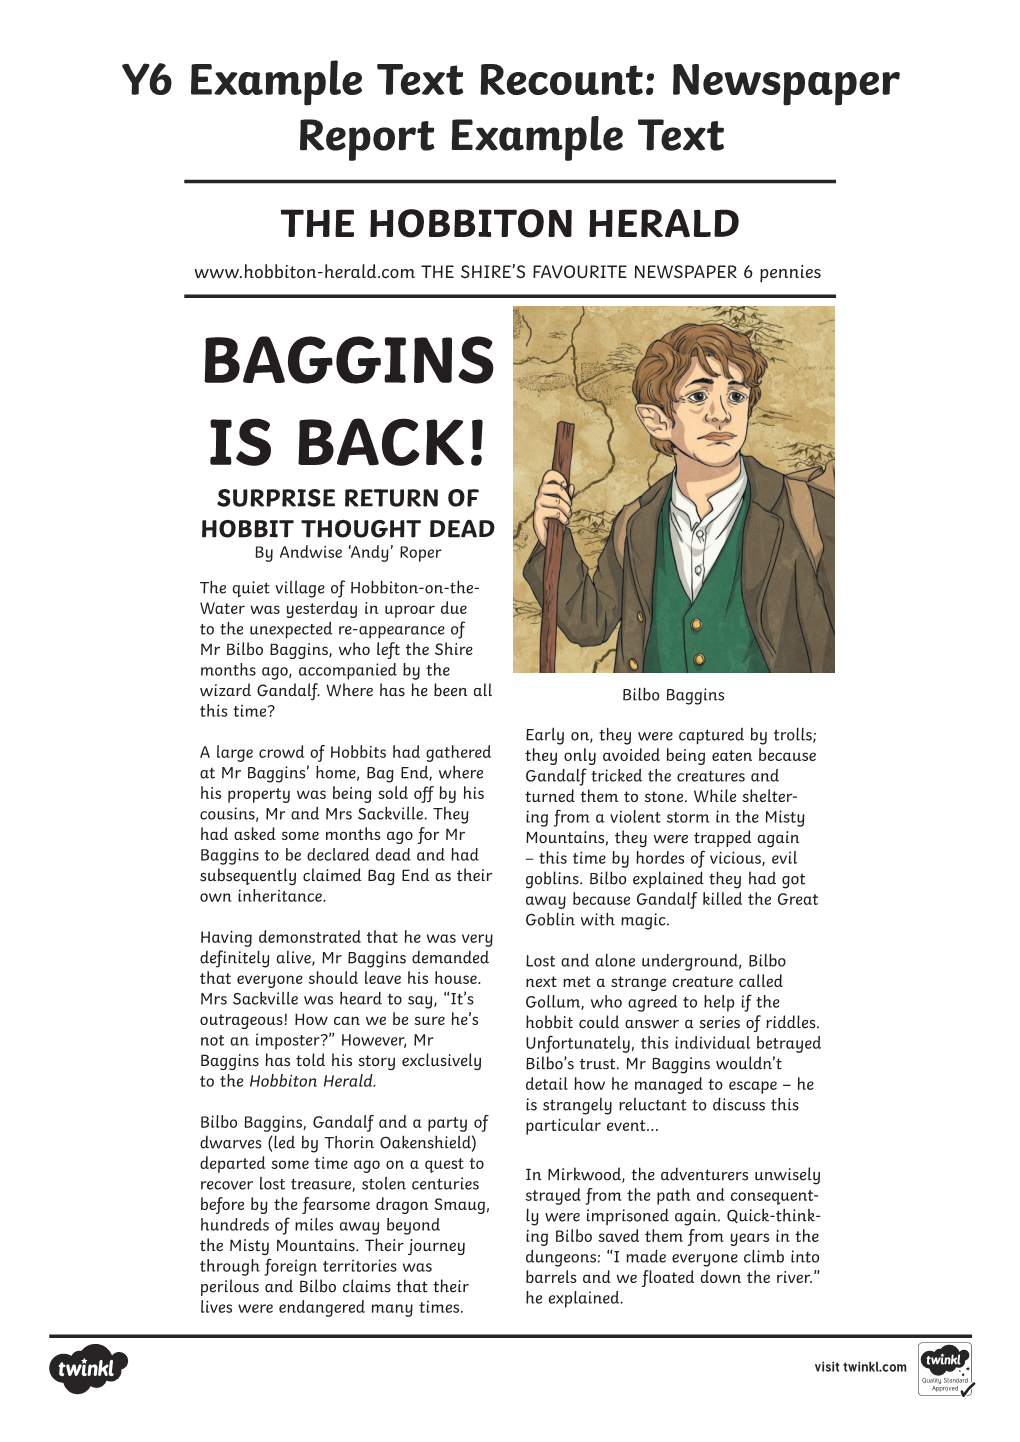 BAGGINS IS BACK! SURPRISE RETURN of HOBBIT THOUGHT DEAD by Andwise ‘Andy’ Roper